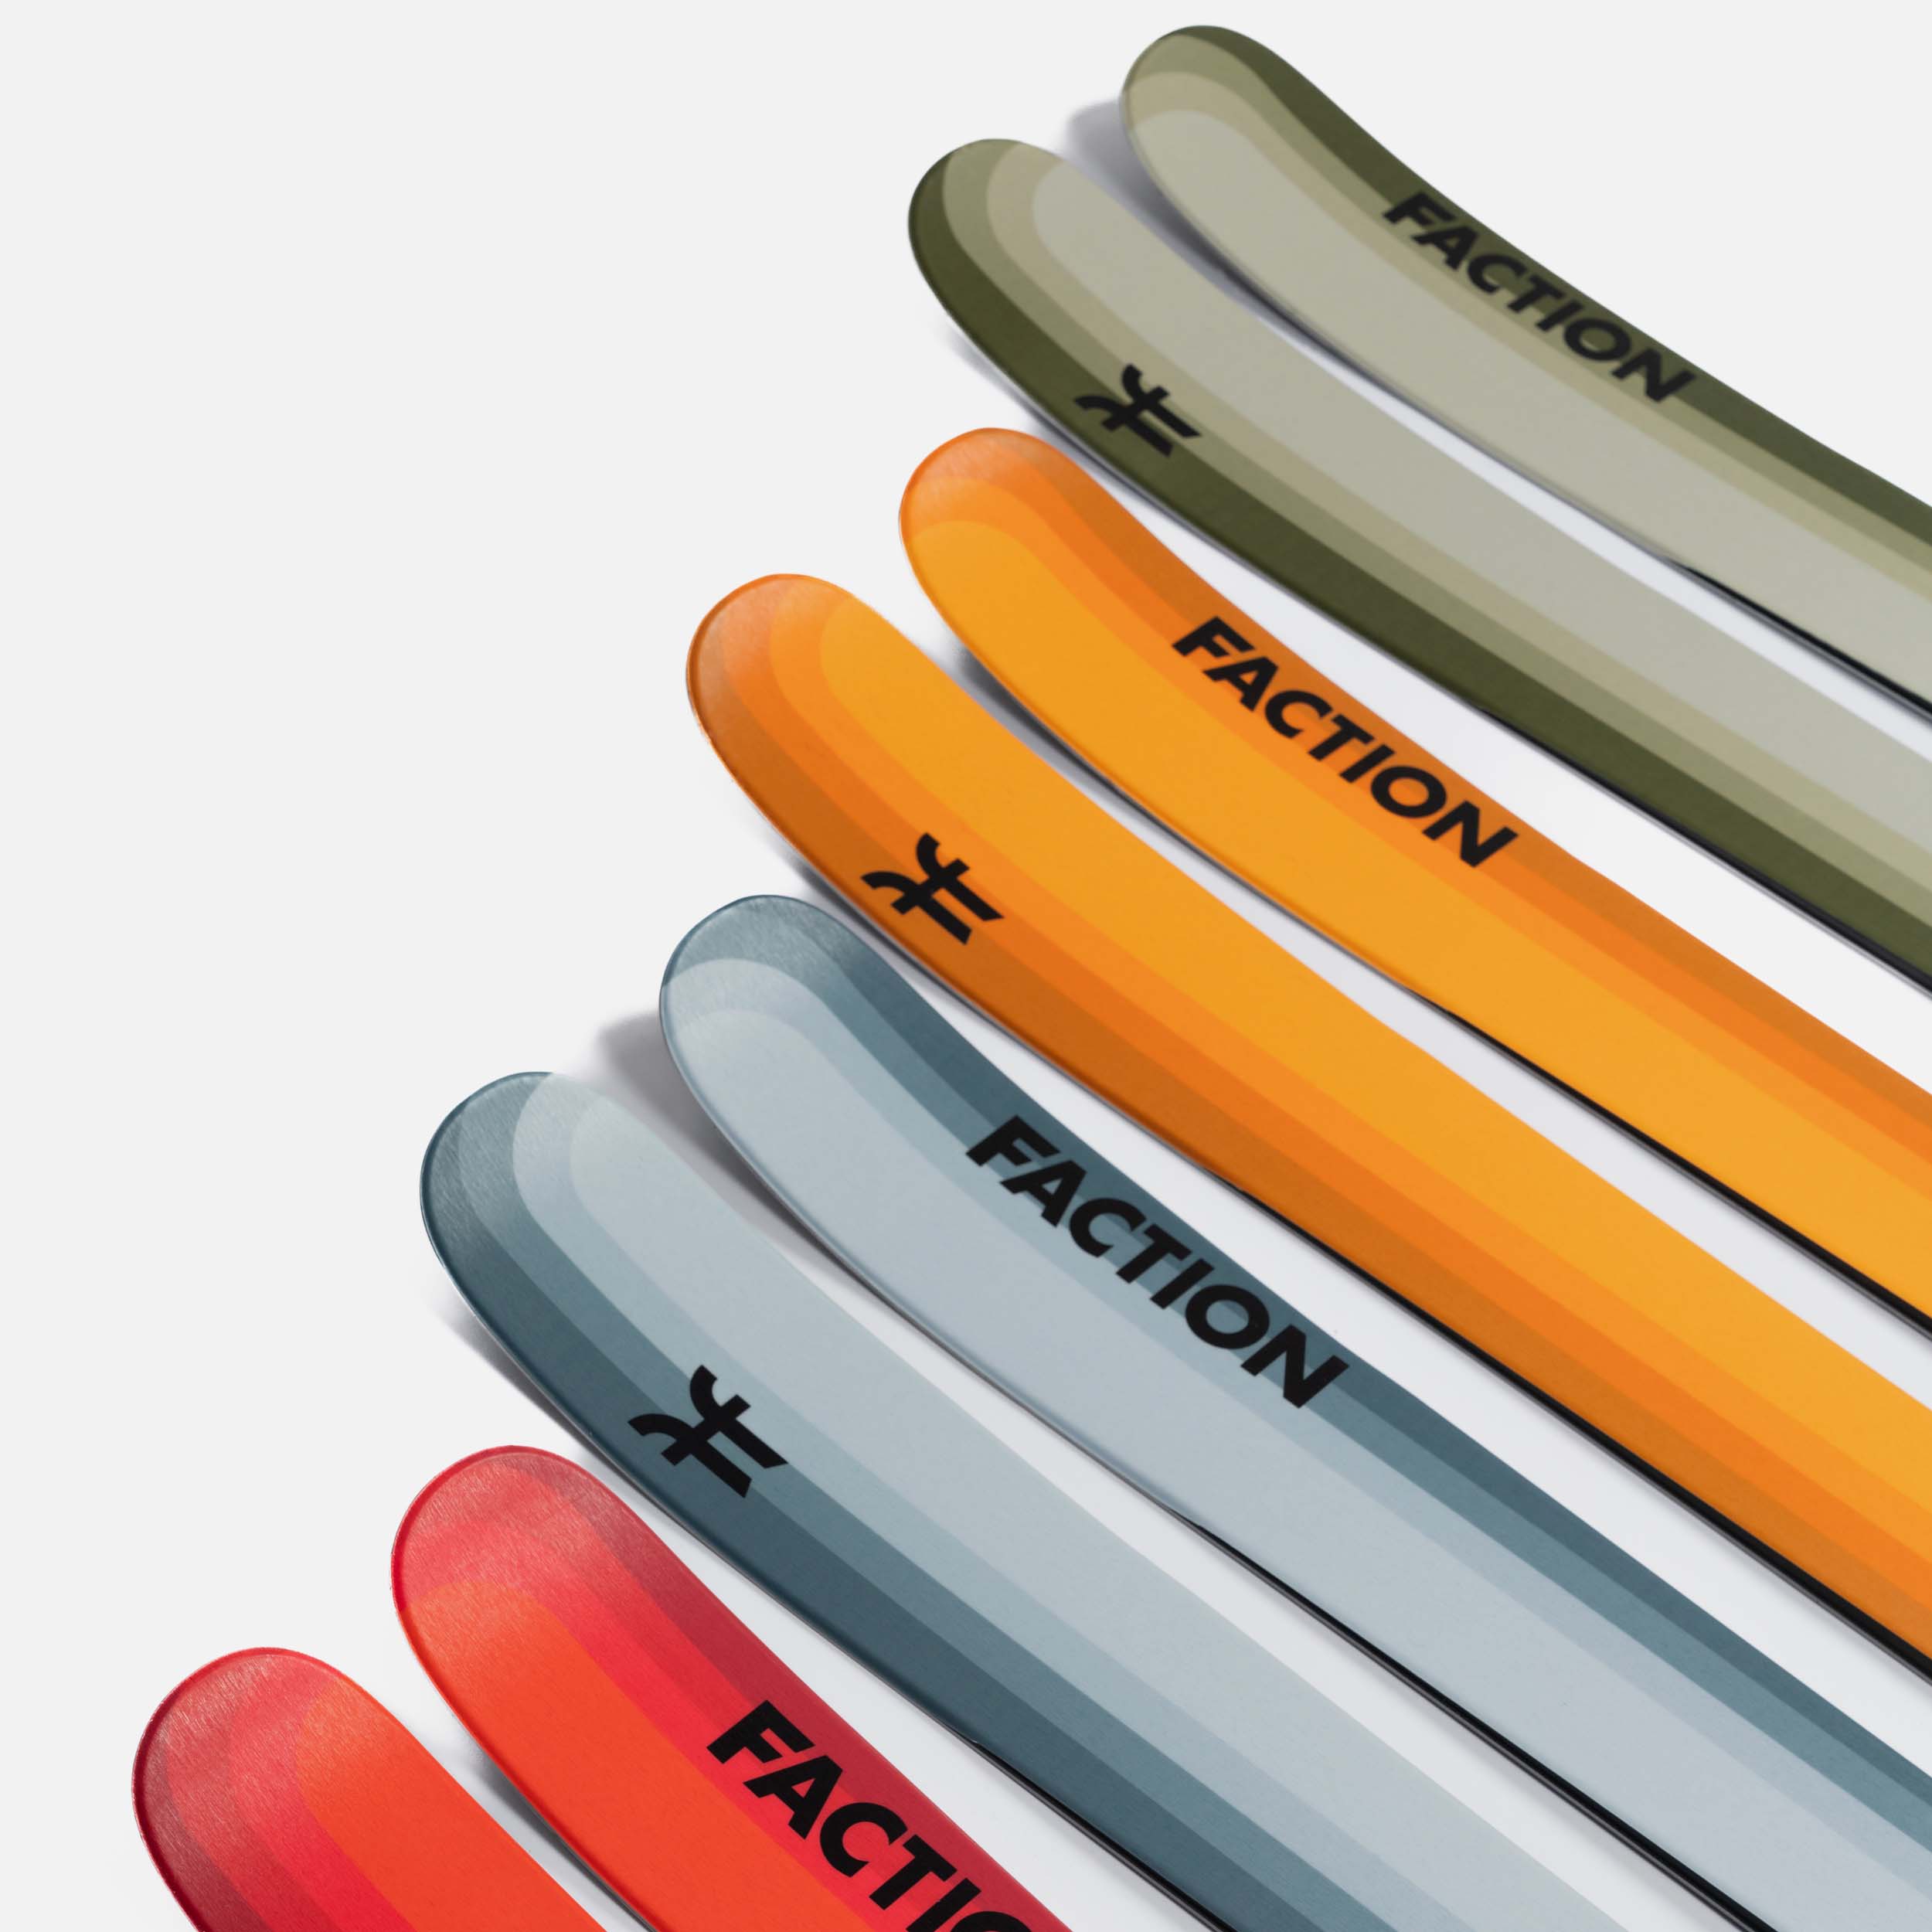 Our most-loved flat-tail skis